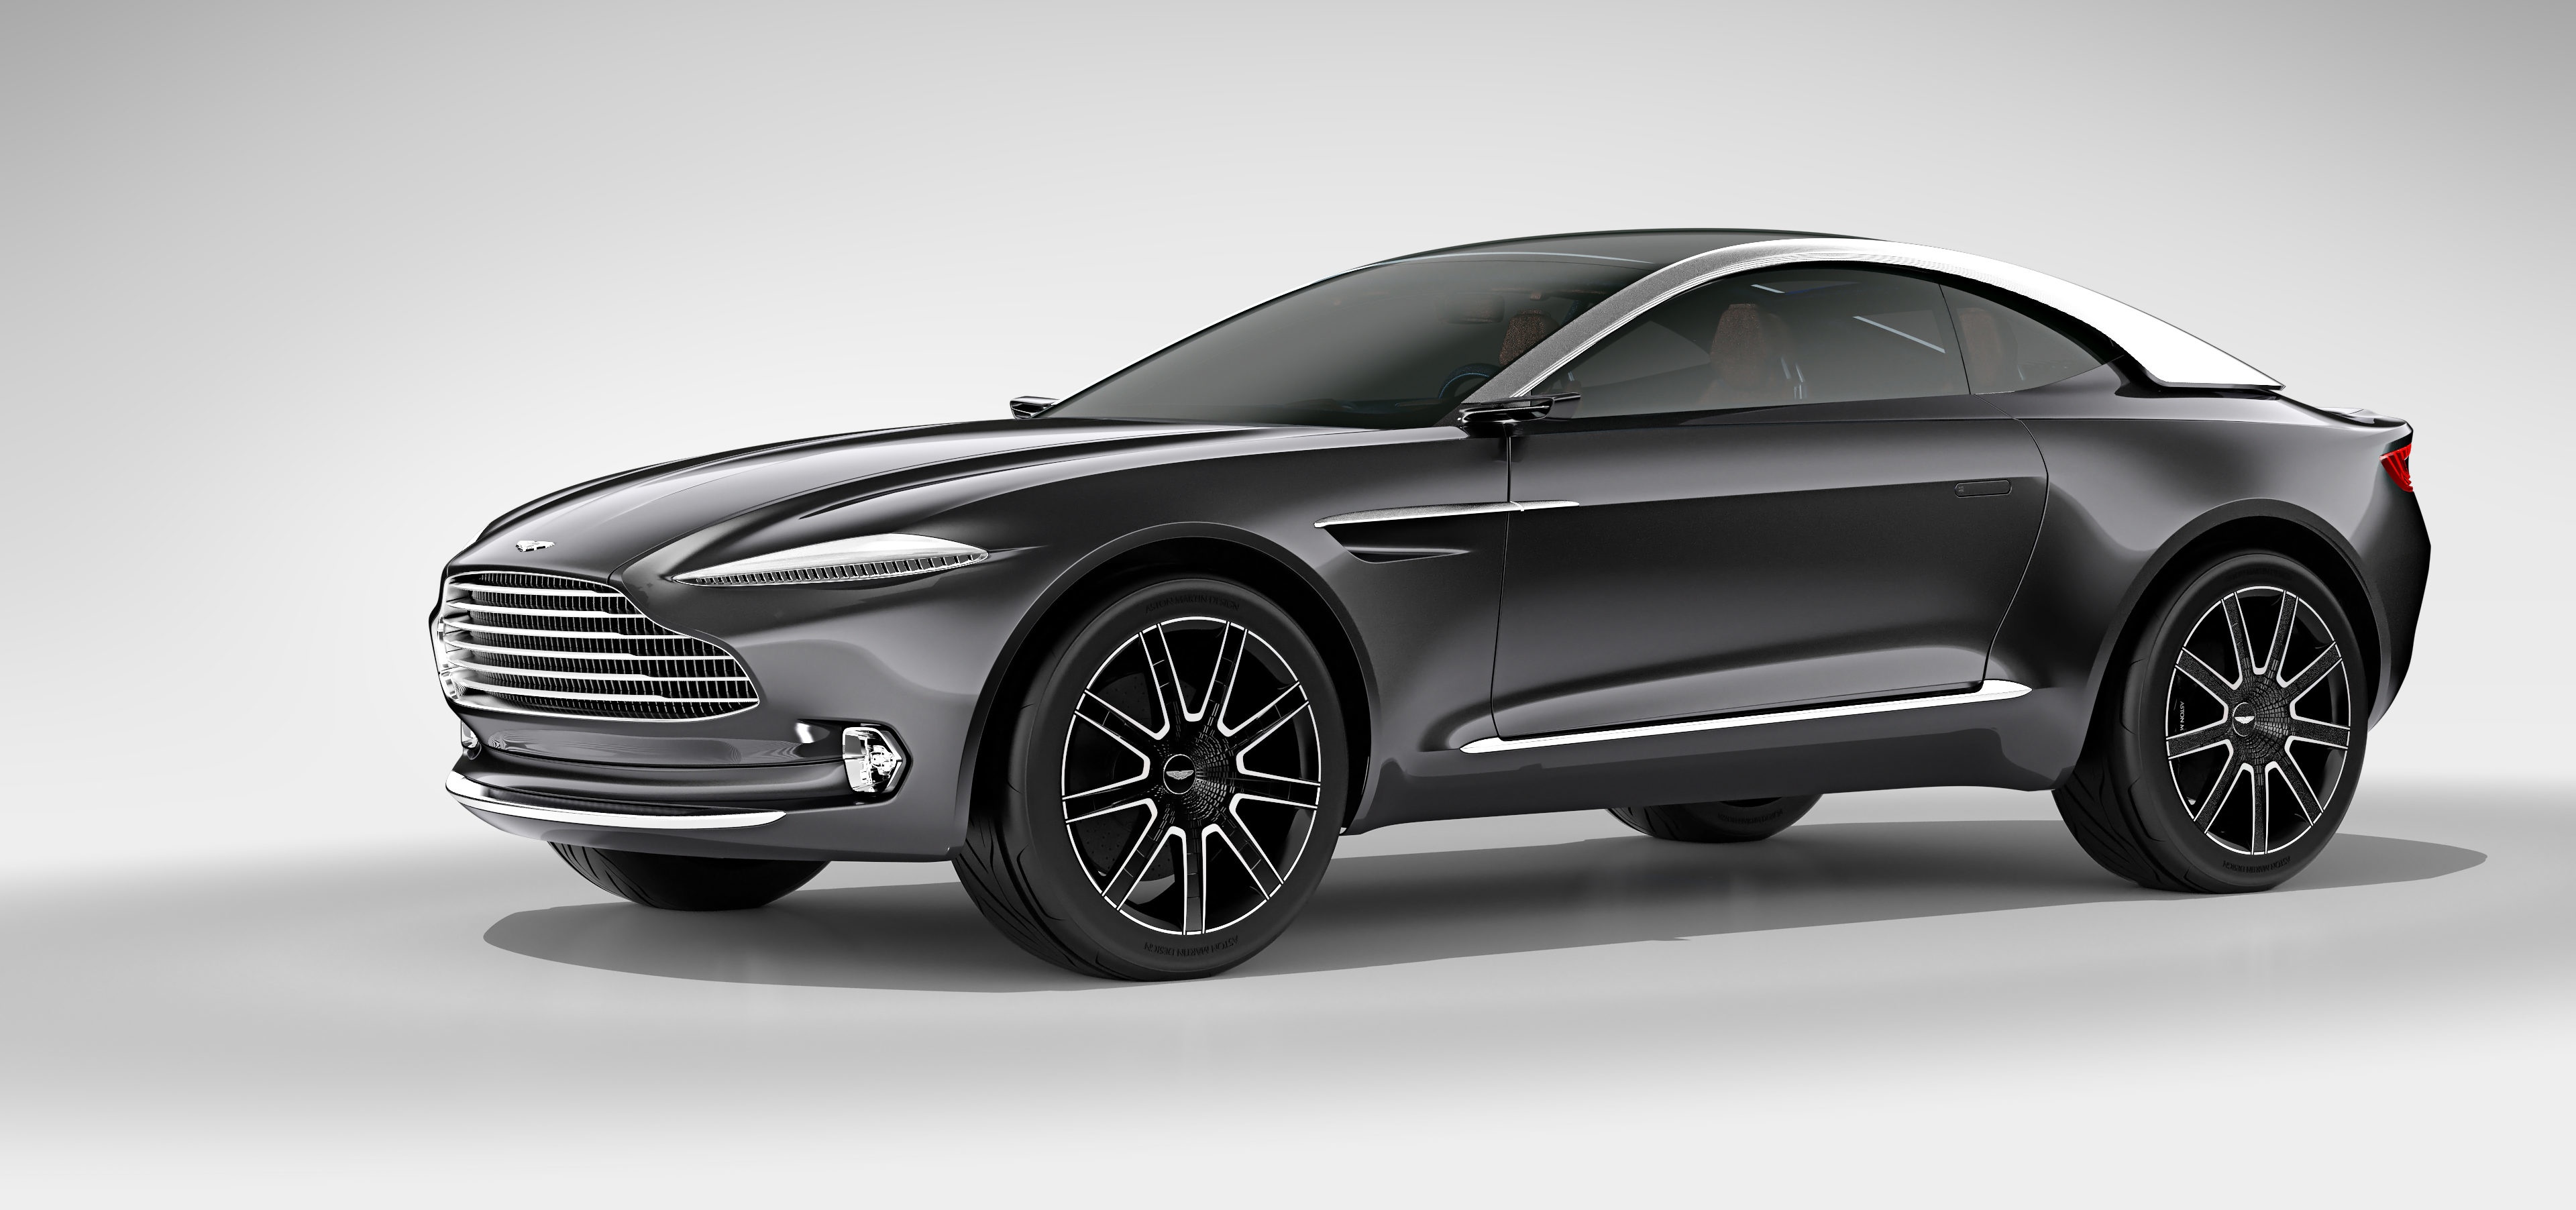 The Future Of Luxury: Introducing The Aston Martin DBX Concept